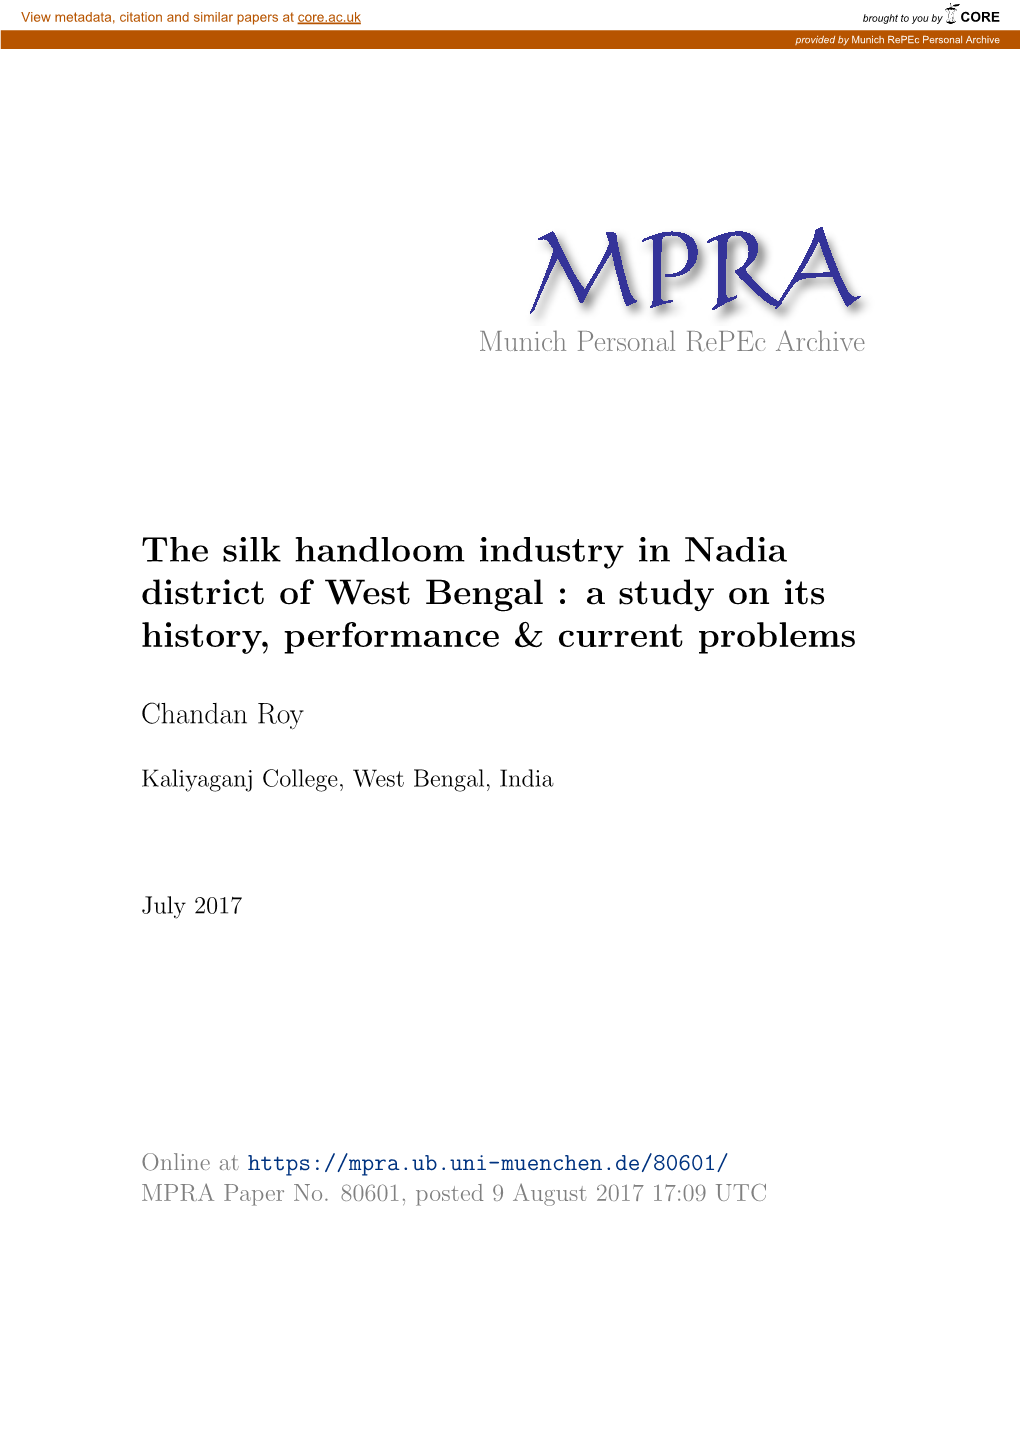 The Silk Handloom Industry in Nadia District of West Bengal : a Study on Its History, Performance & Current Problems